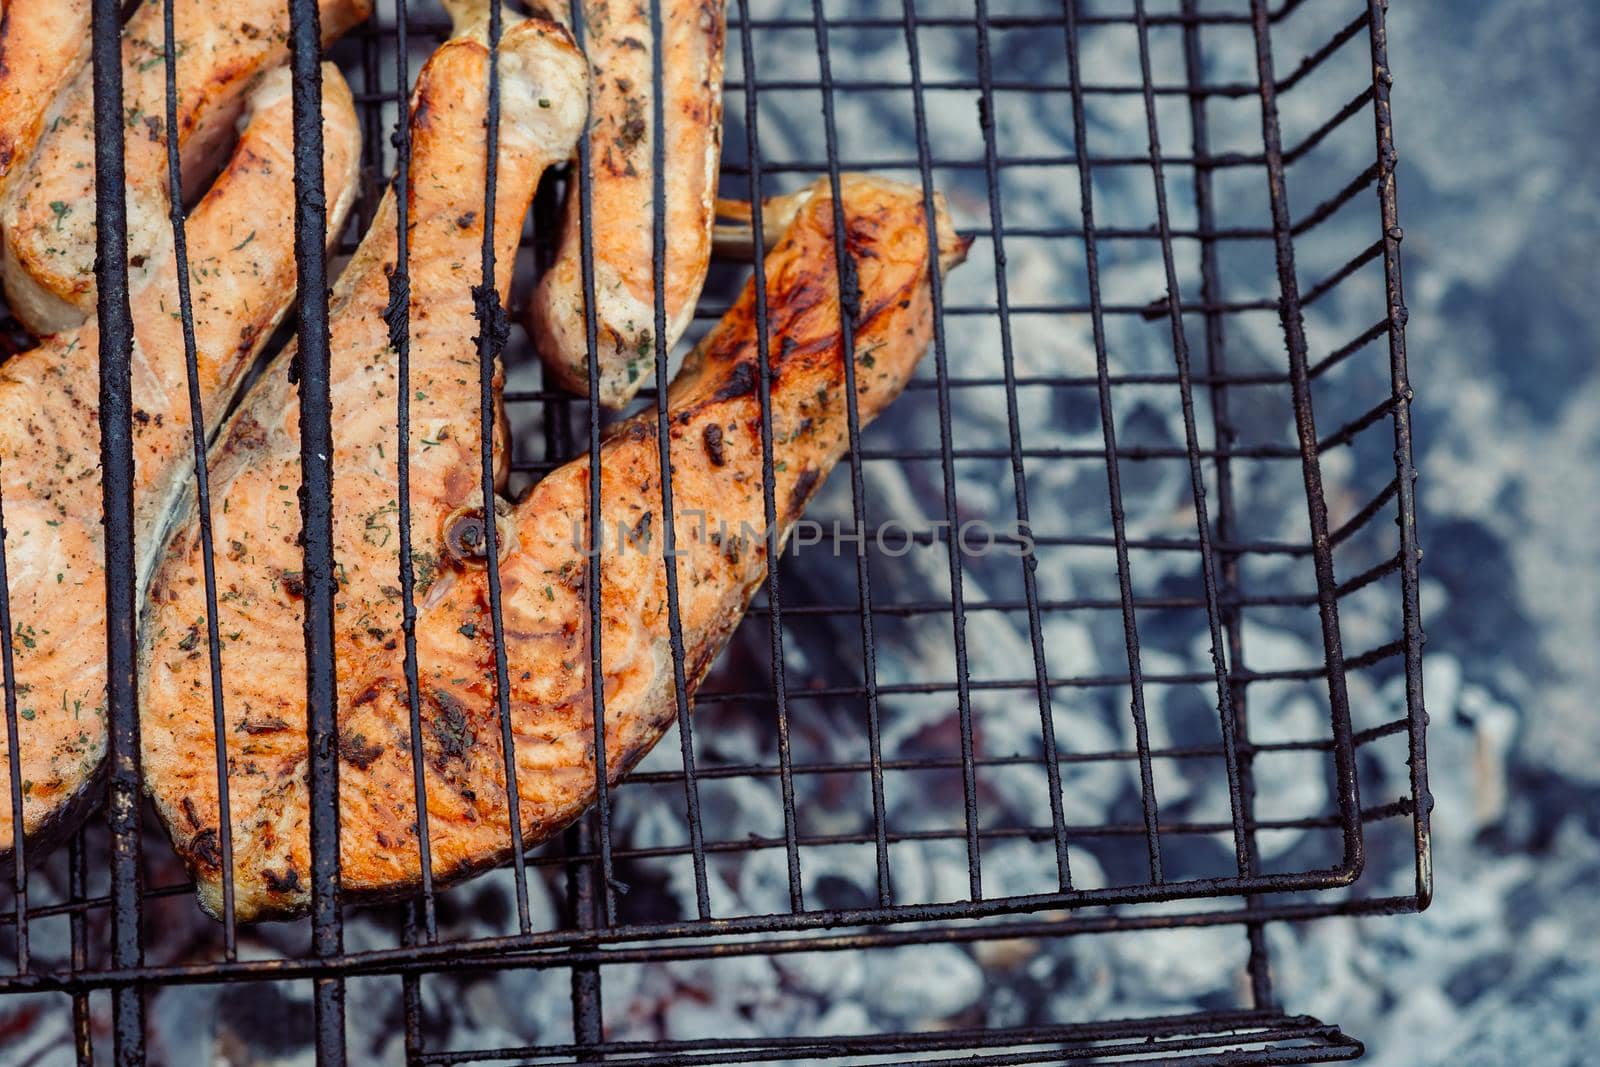 grilled fish bbq charcoal cooking nature summer by Vichizh